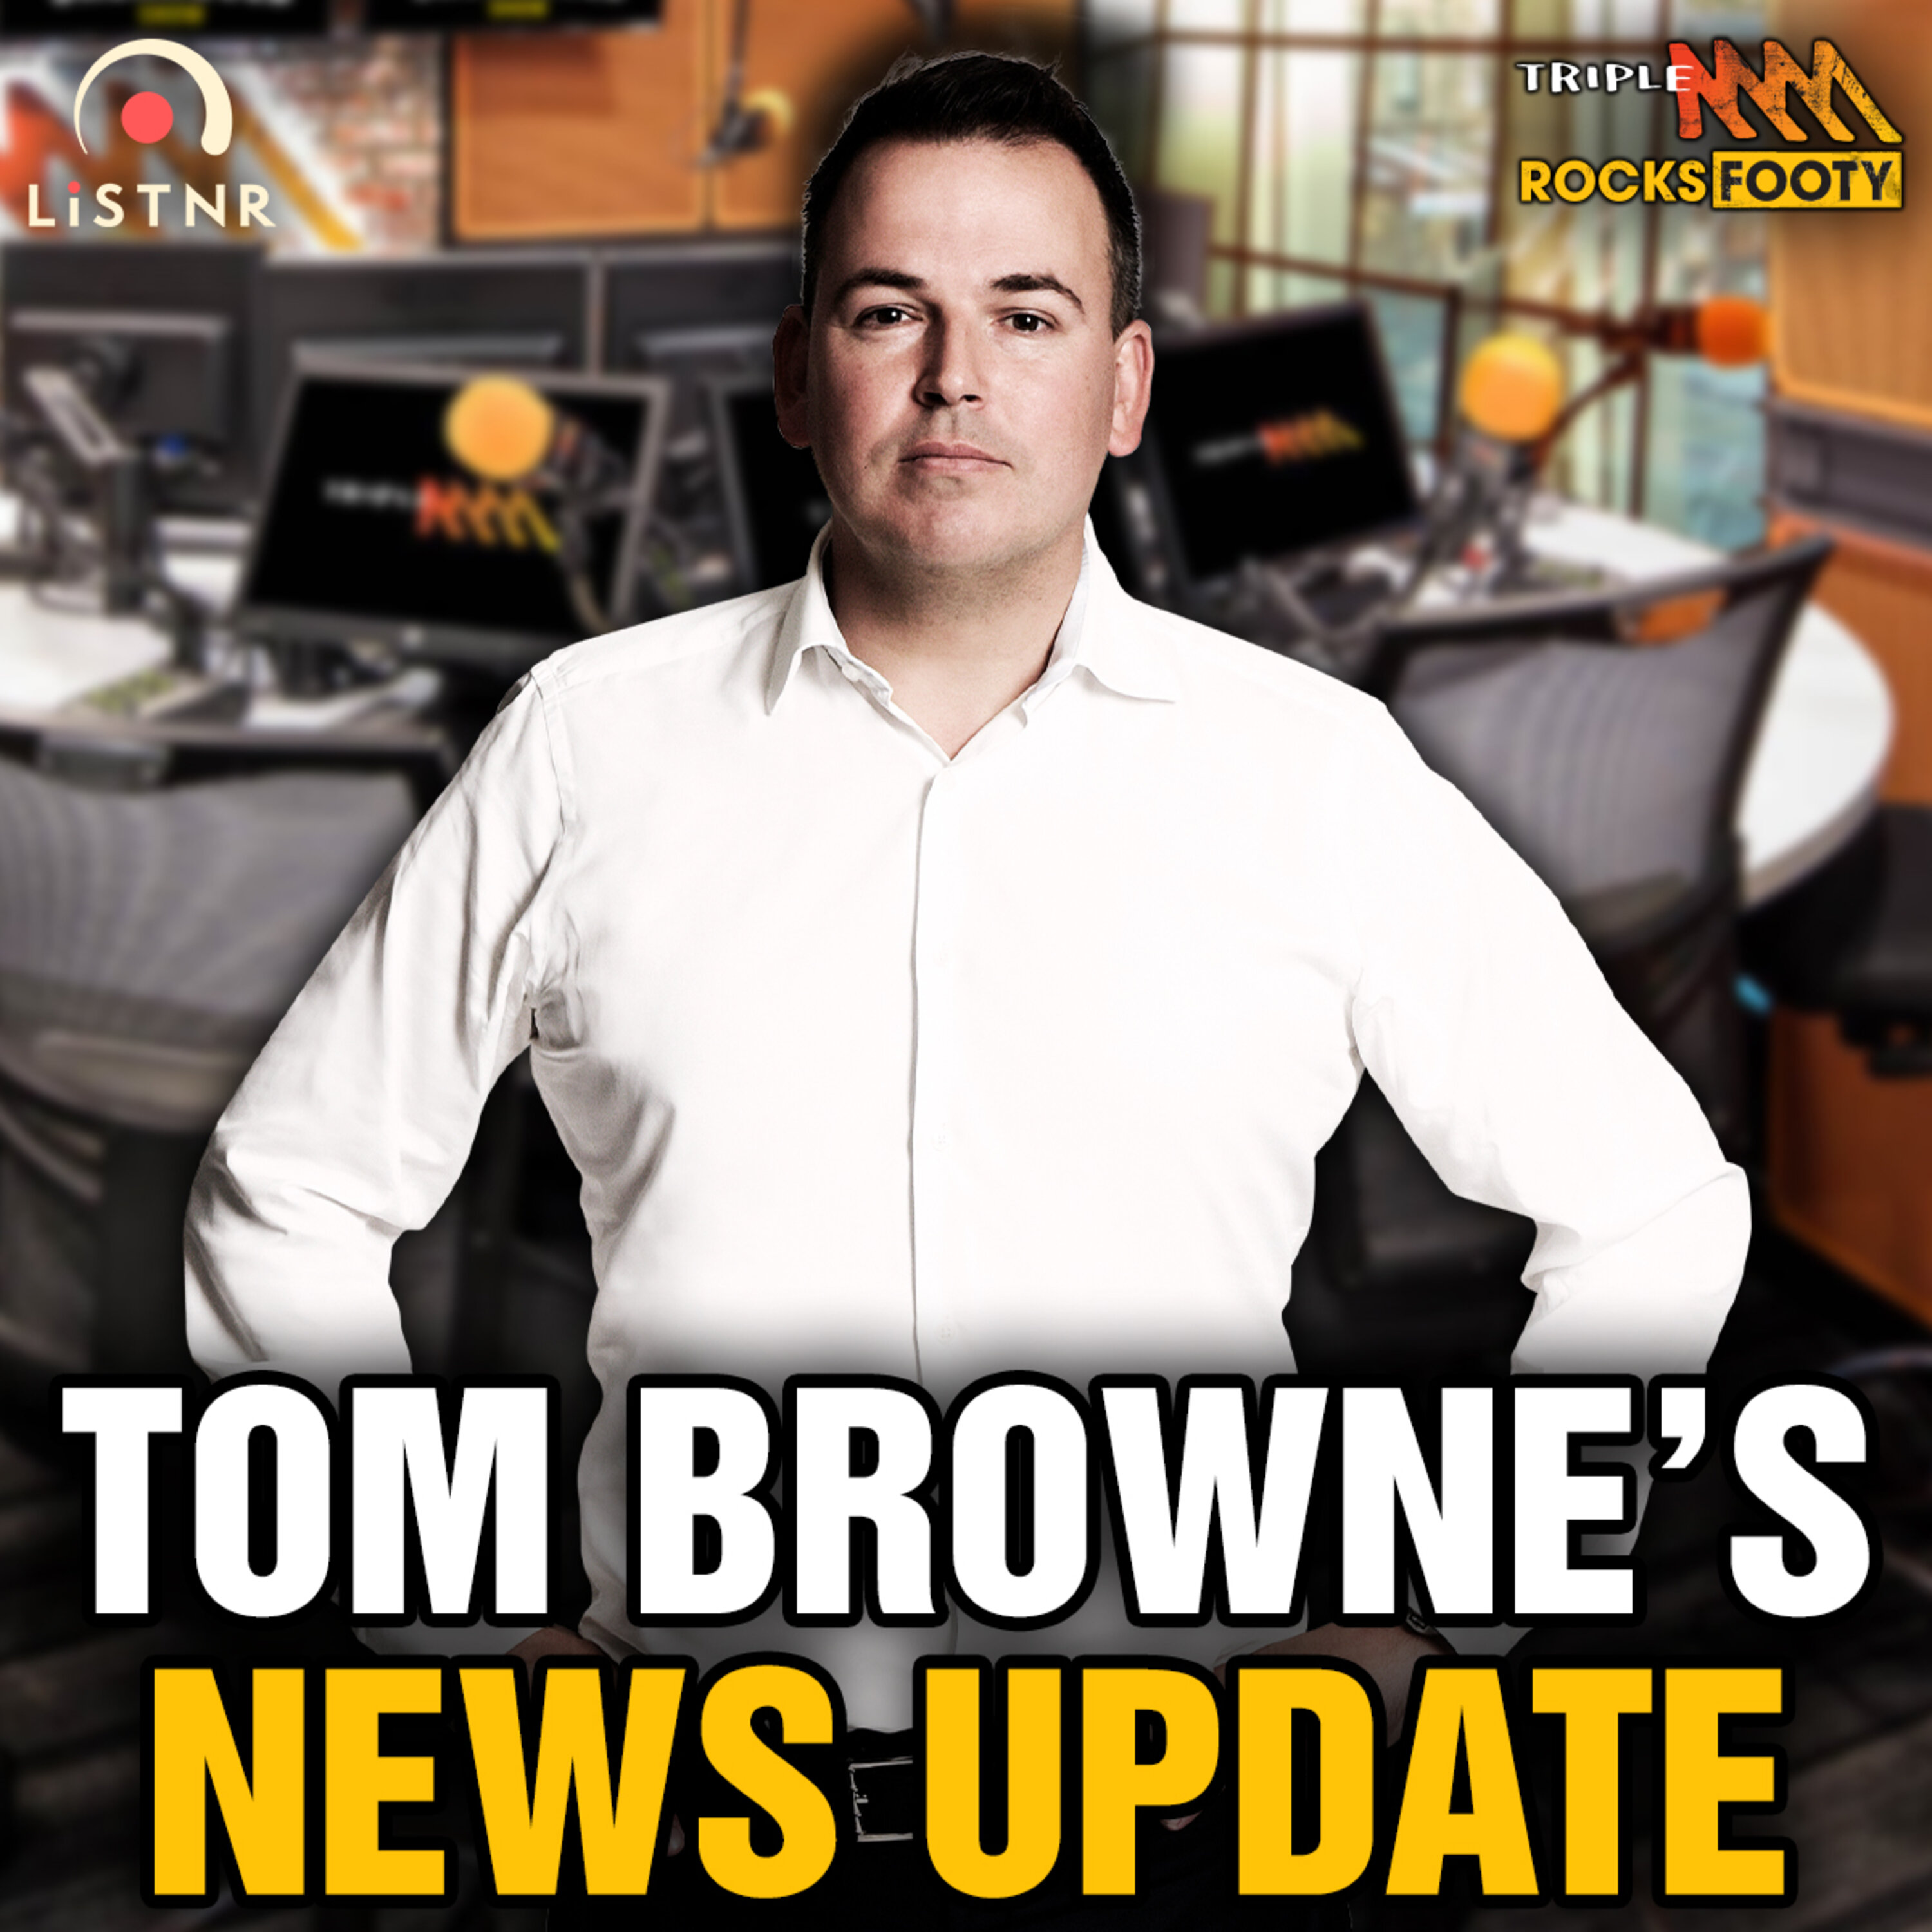 Tom Browne's News | Update on player photos being shared, Clayton Oliver's hamstring, Stuart Dew's future